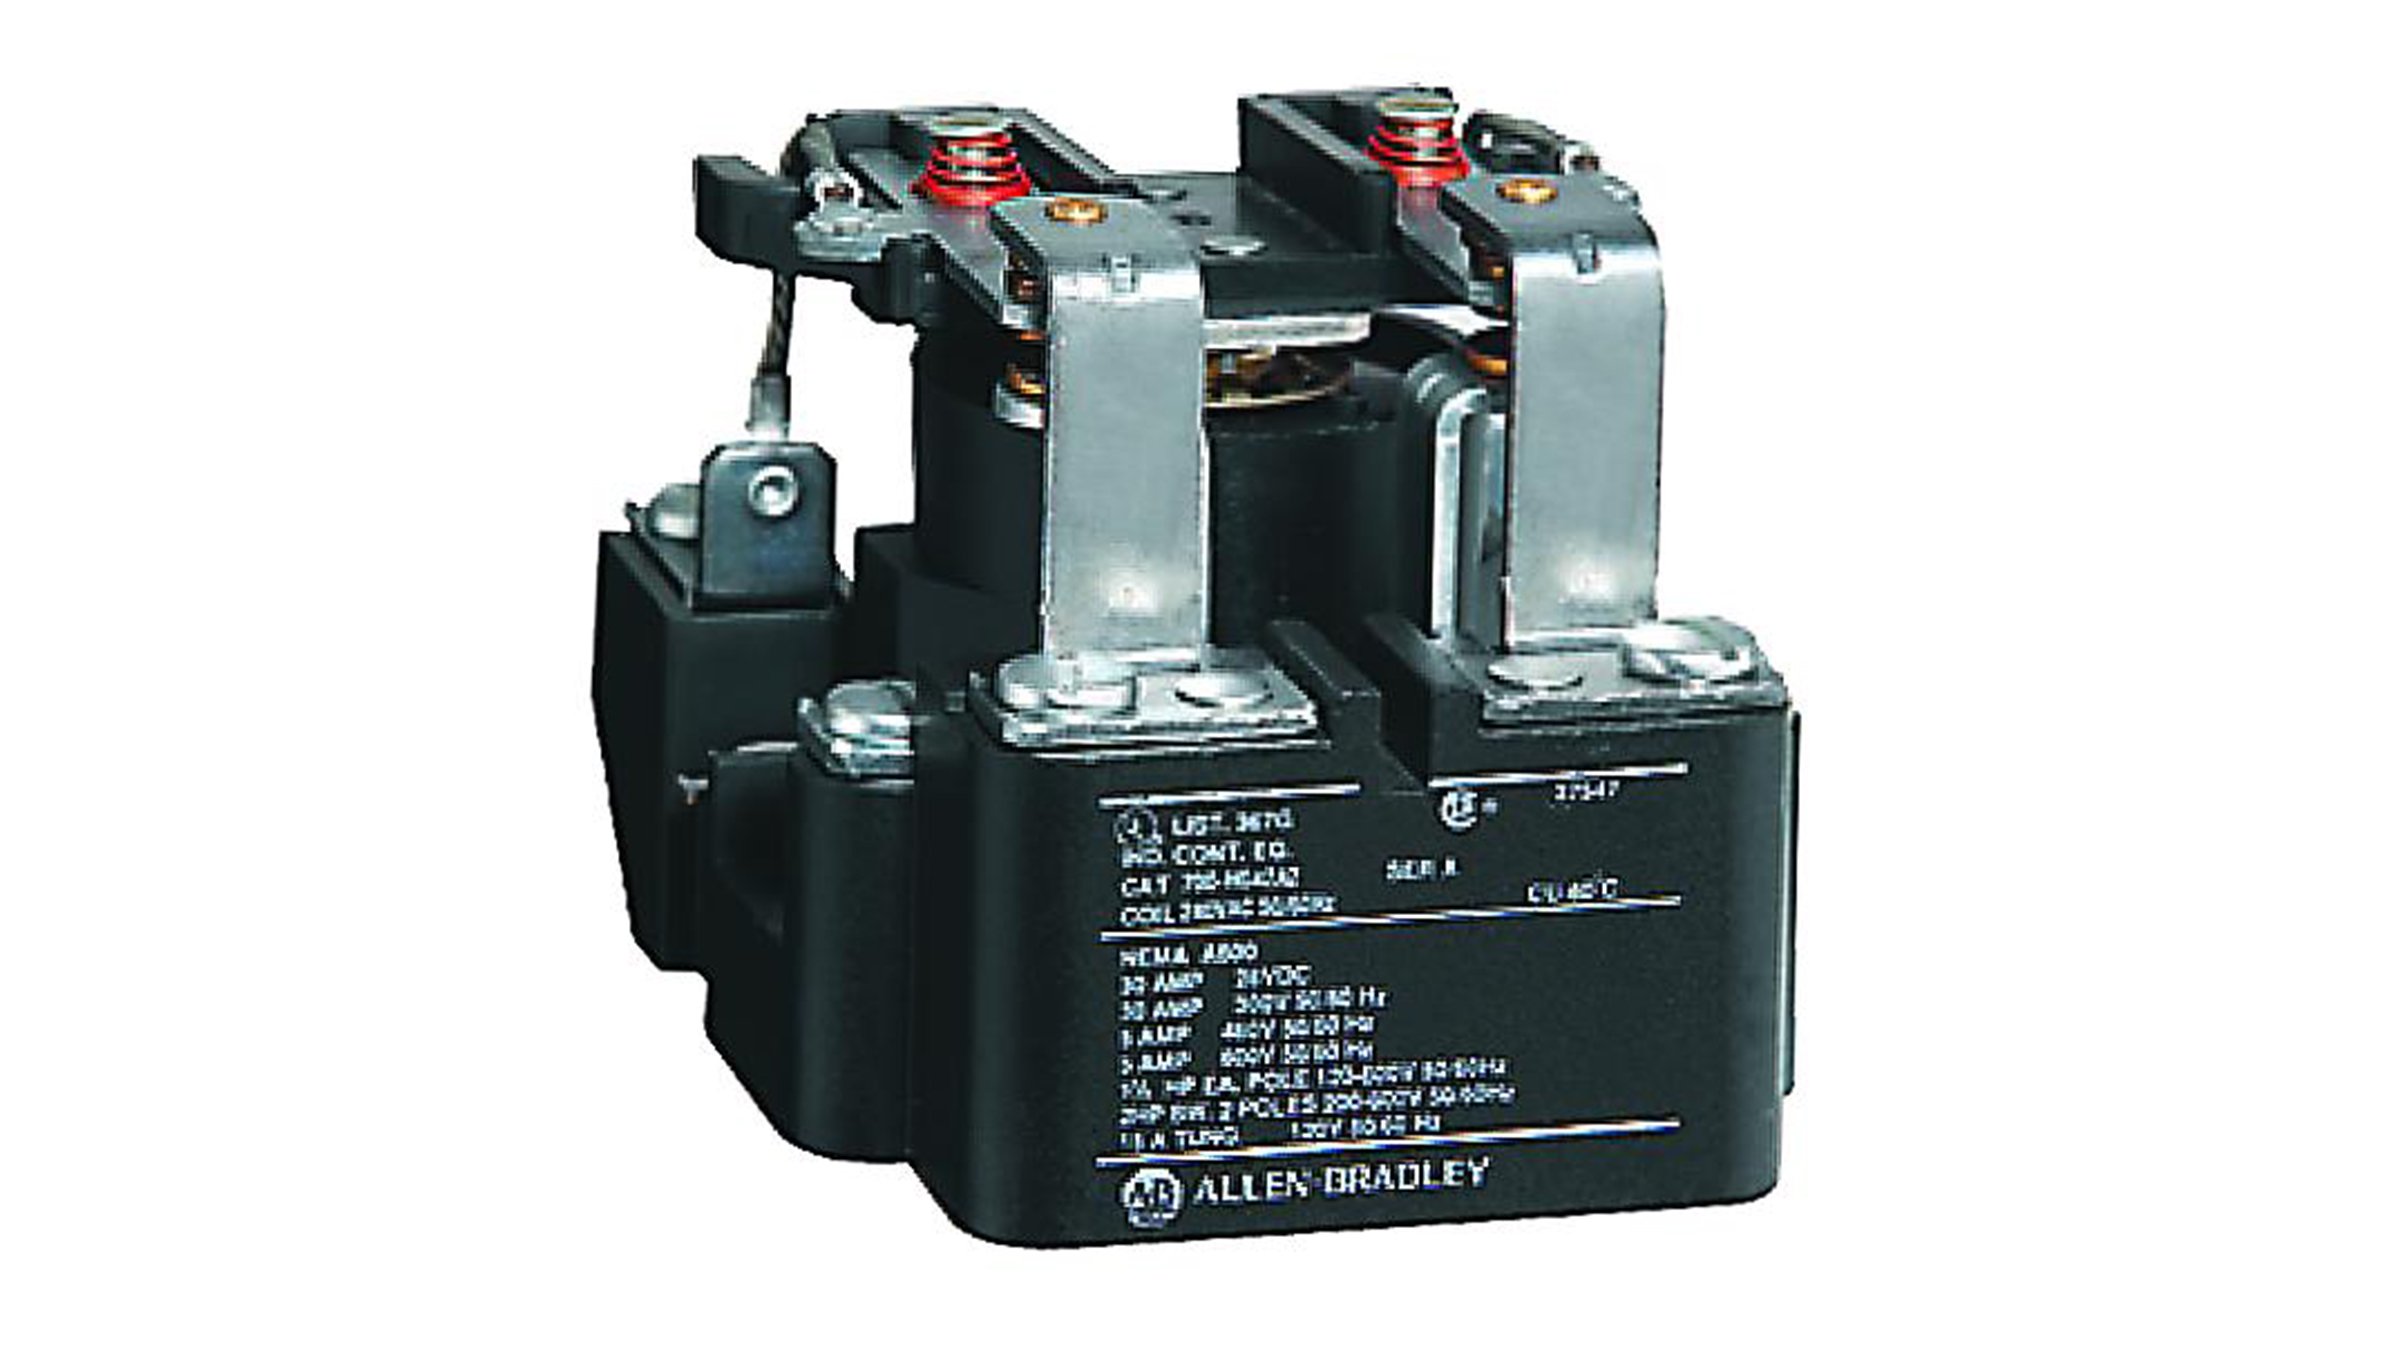 Allen-Bradley Bulletin 700-HG Power Relays are suitable for switching DC loads.